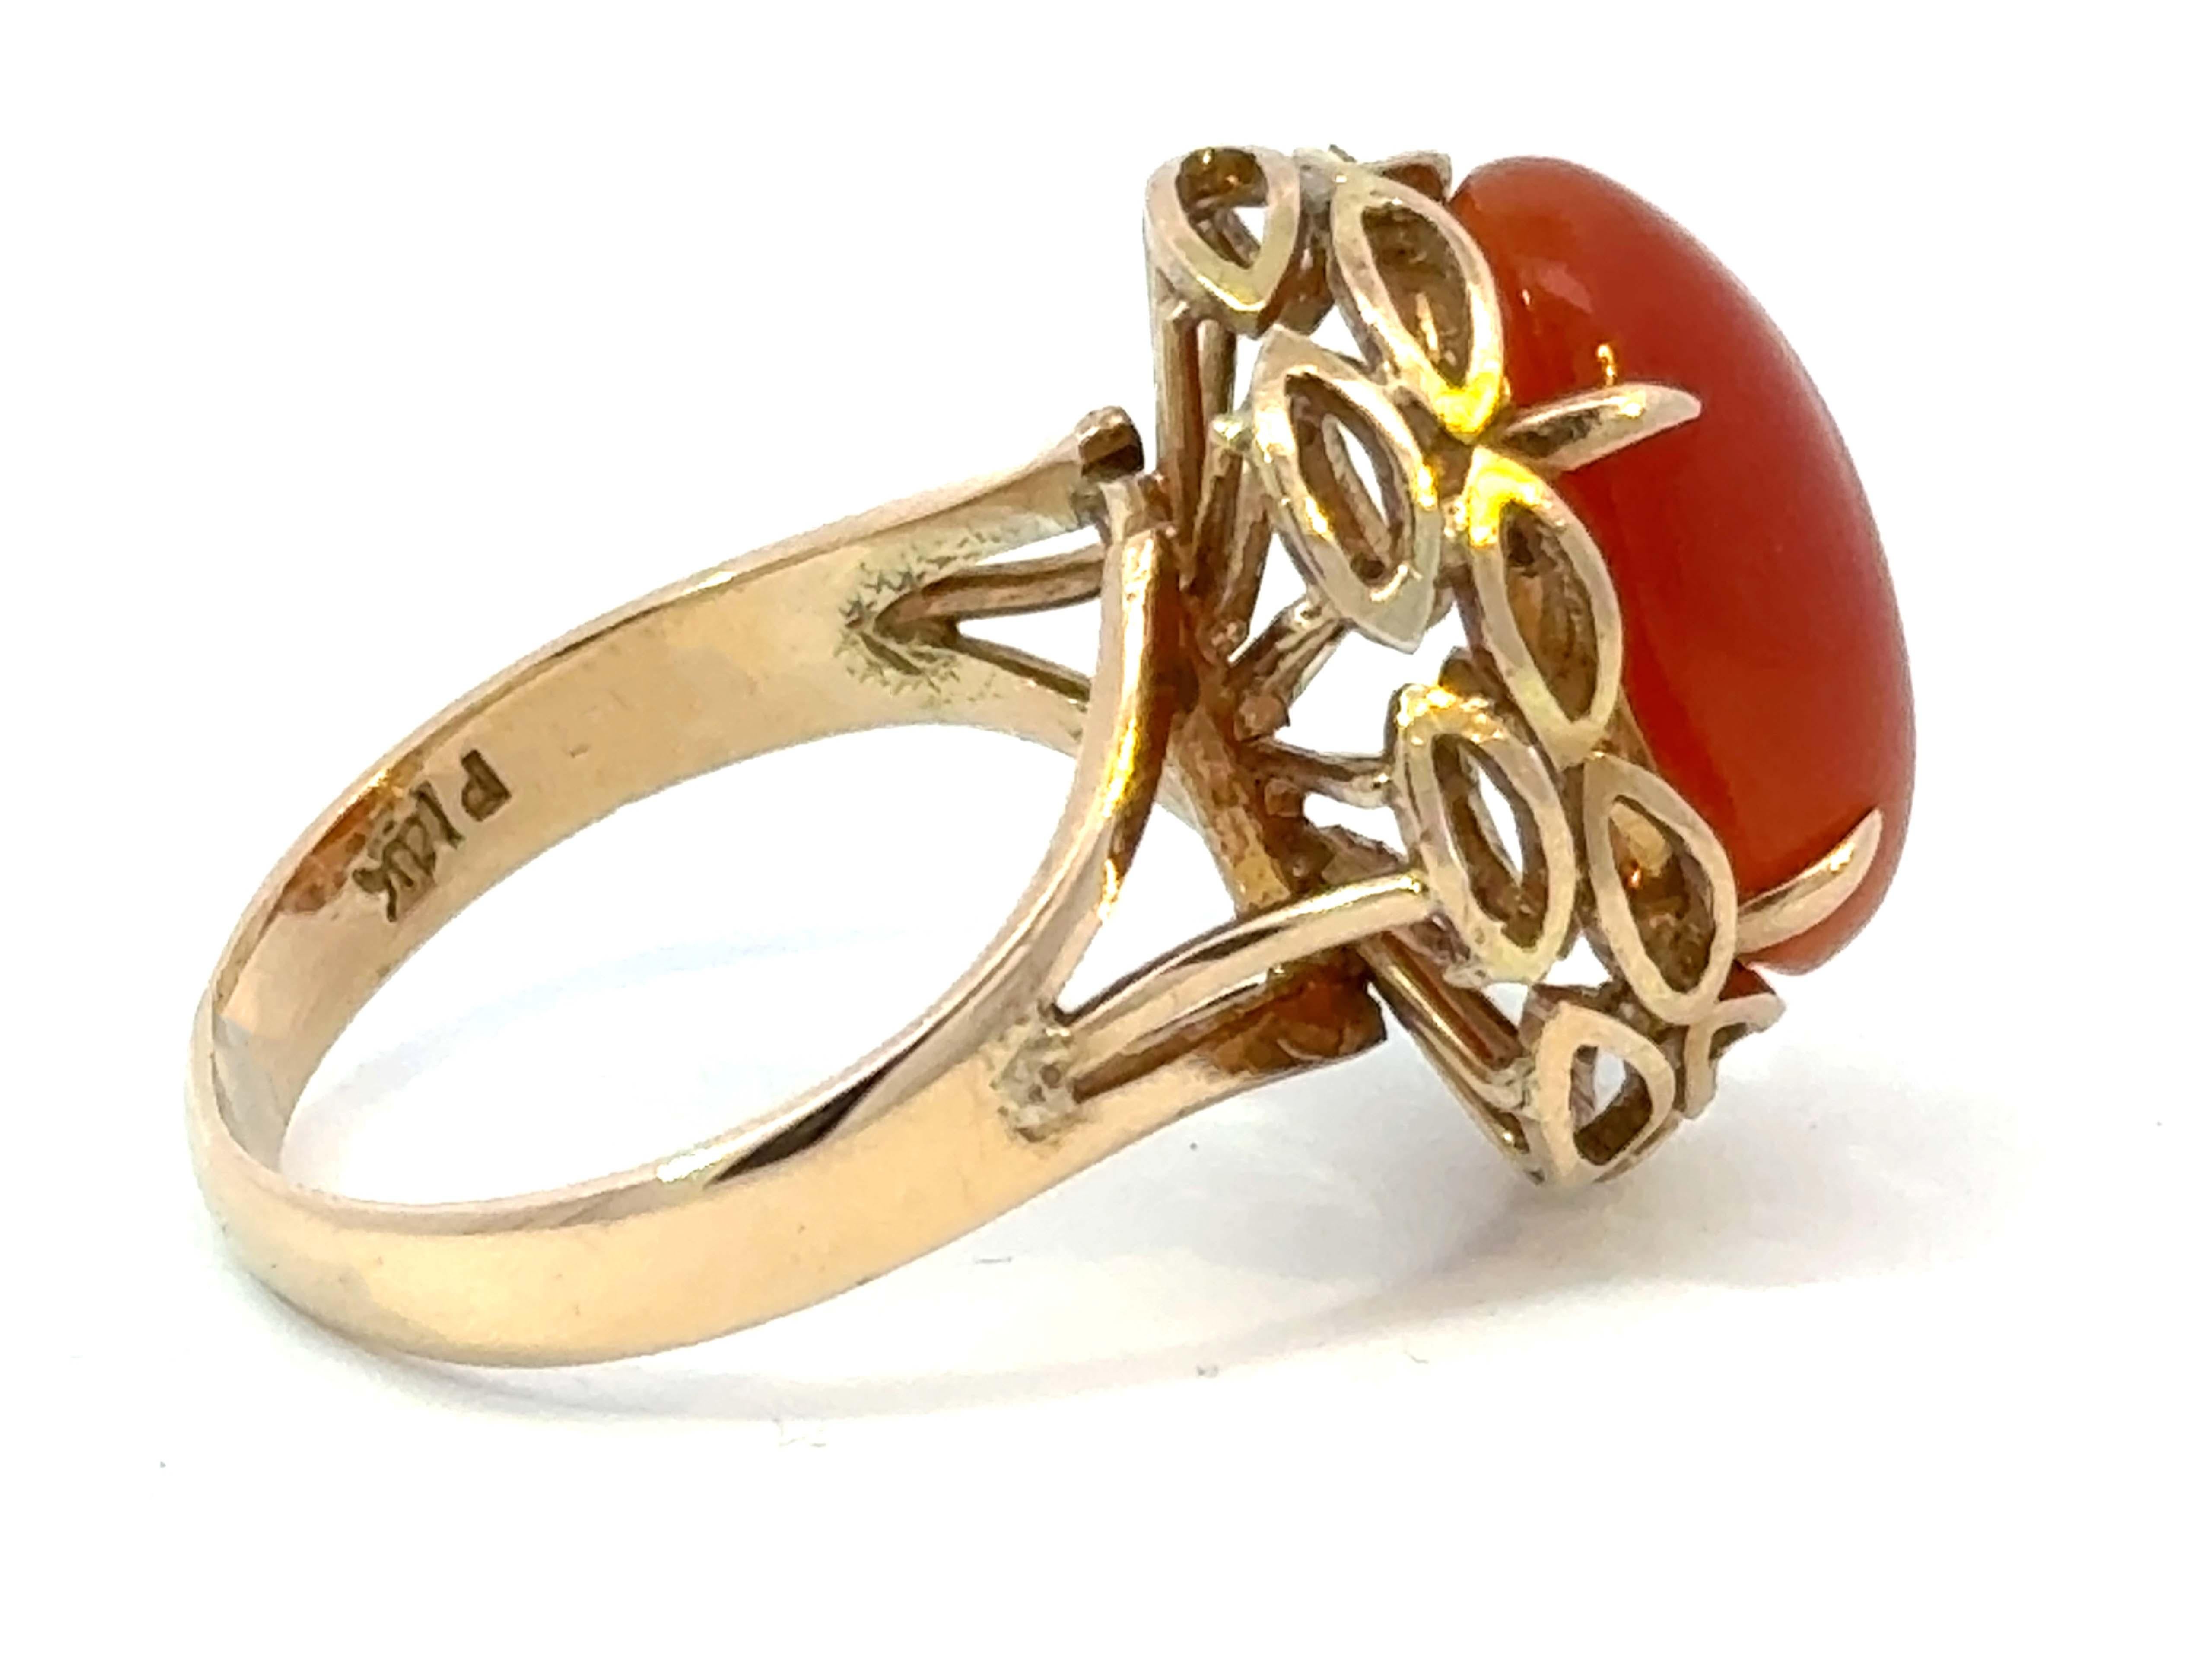 Oval Cabochon Red Jade Ring 14k Yellow Gold In Excellent Condition For Sale In Honolulu, HI